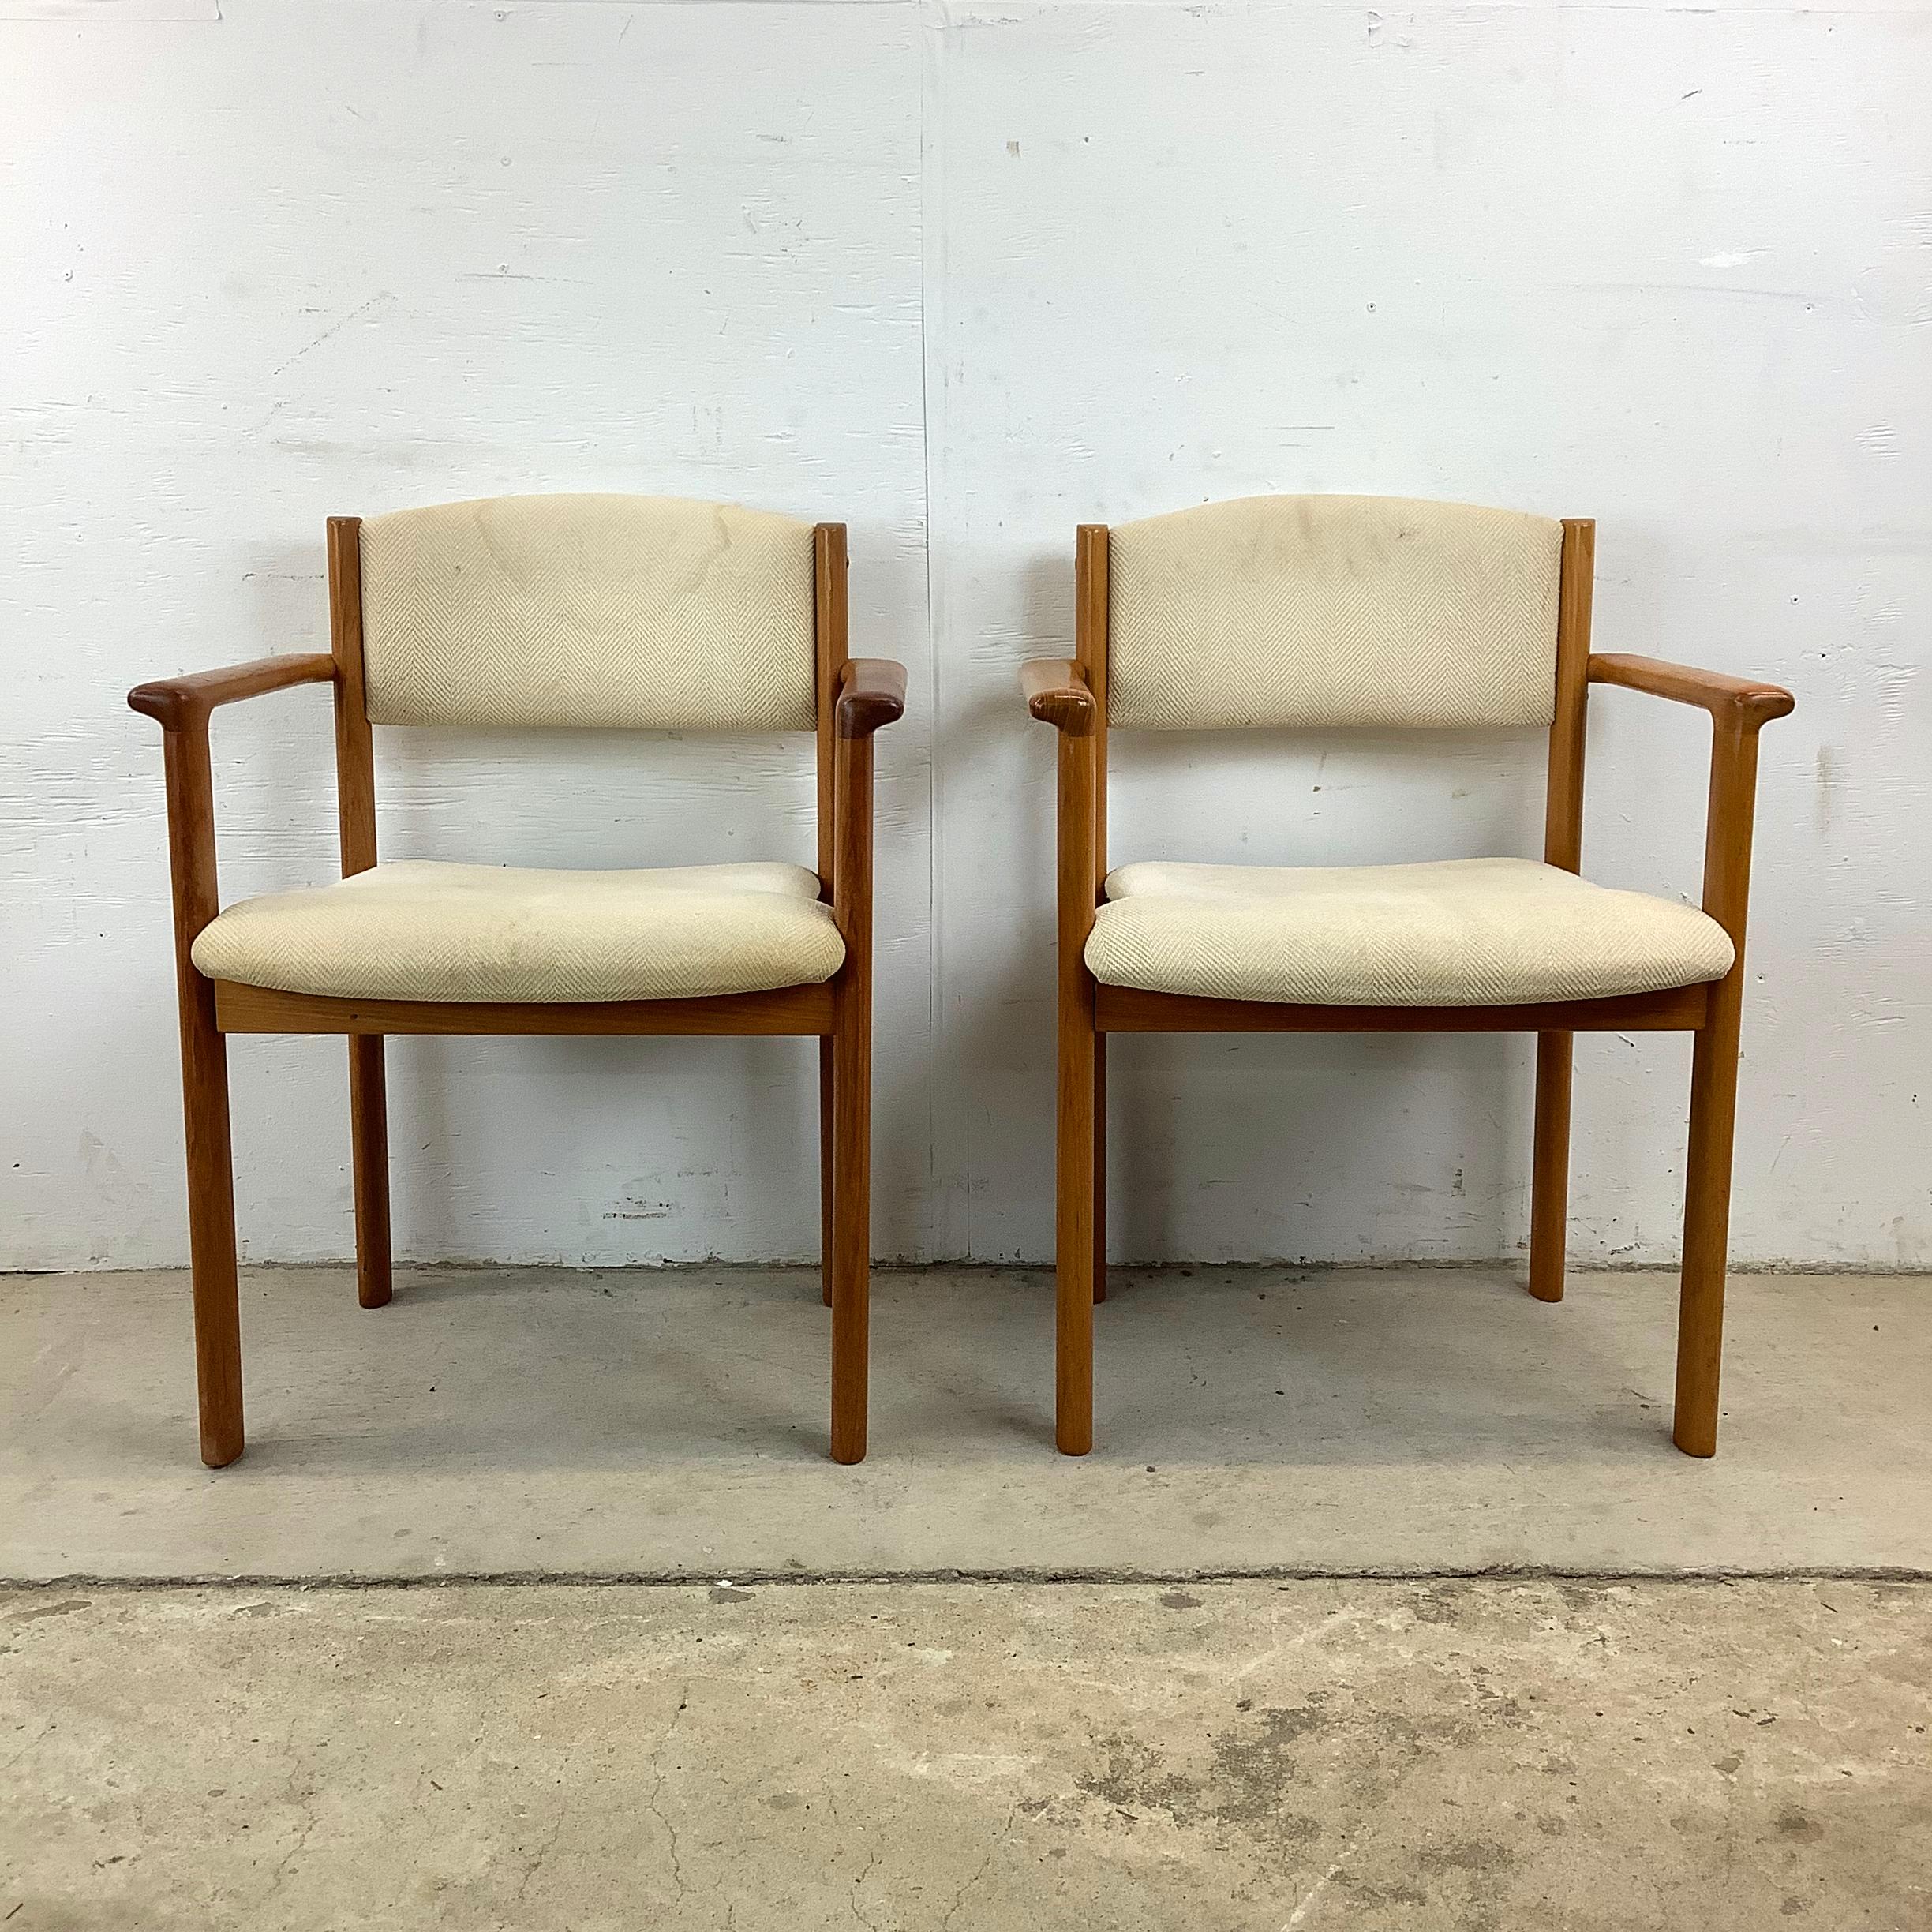 This captivating duo make a great addition to any home or office – they are a unique pair of Scandinavian Modern Teak Armchairs. Crafted with sturdy teak frames and adorned with vintage upholstery, these chairs exude the timeless elegance and